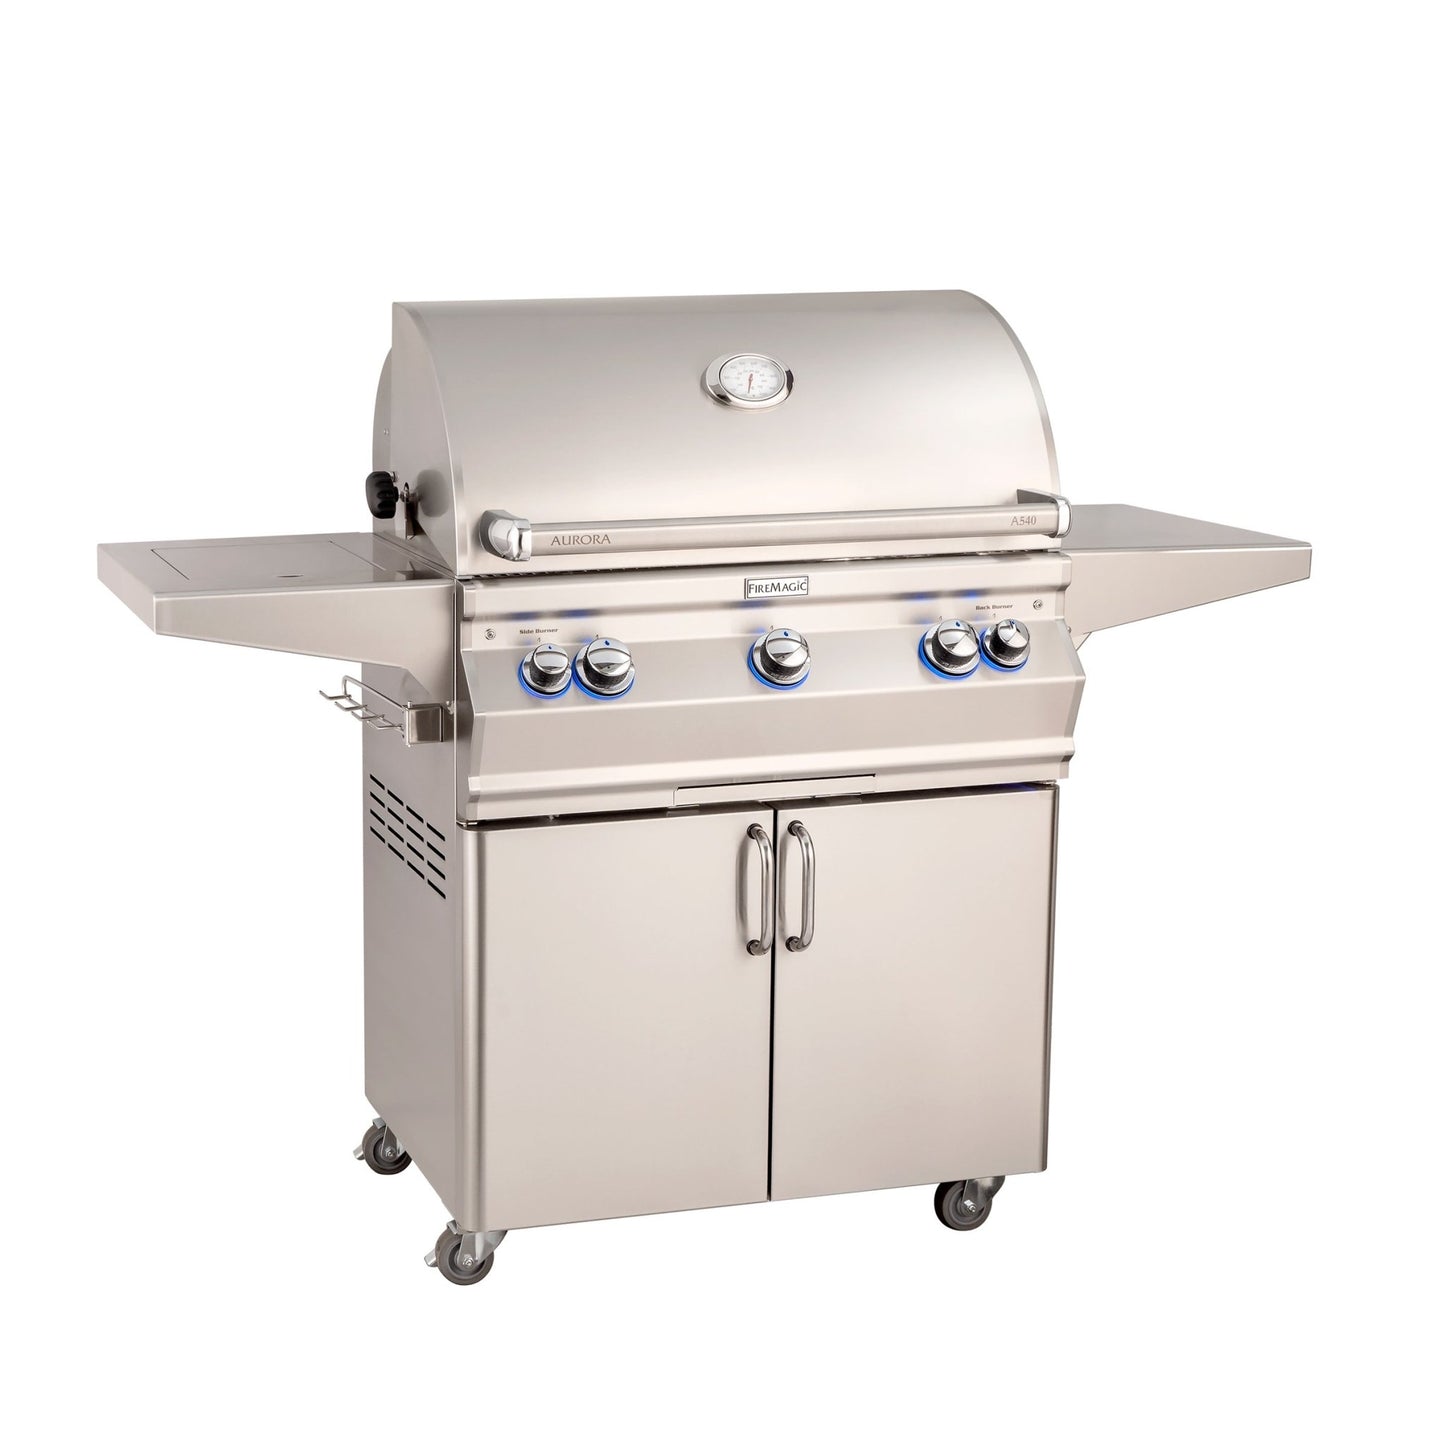 Fire Magic Aurora 30-Inch Portable Gas Grill With Single Side Burner -A540S - Grills N more